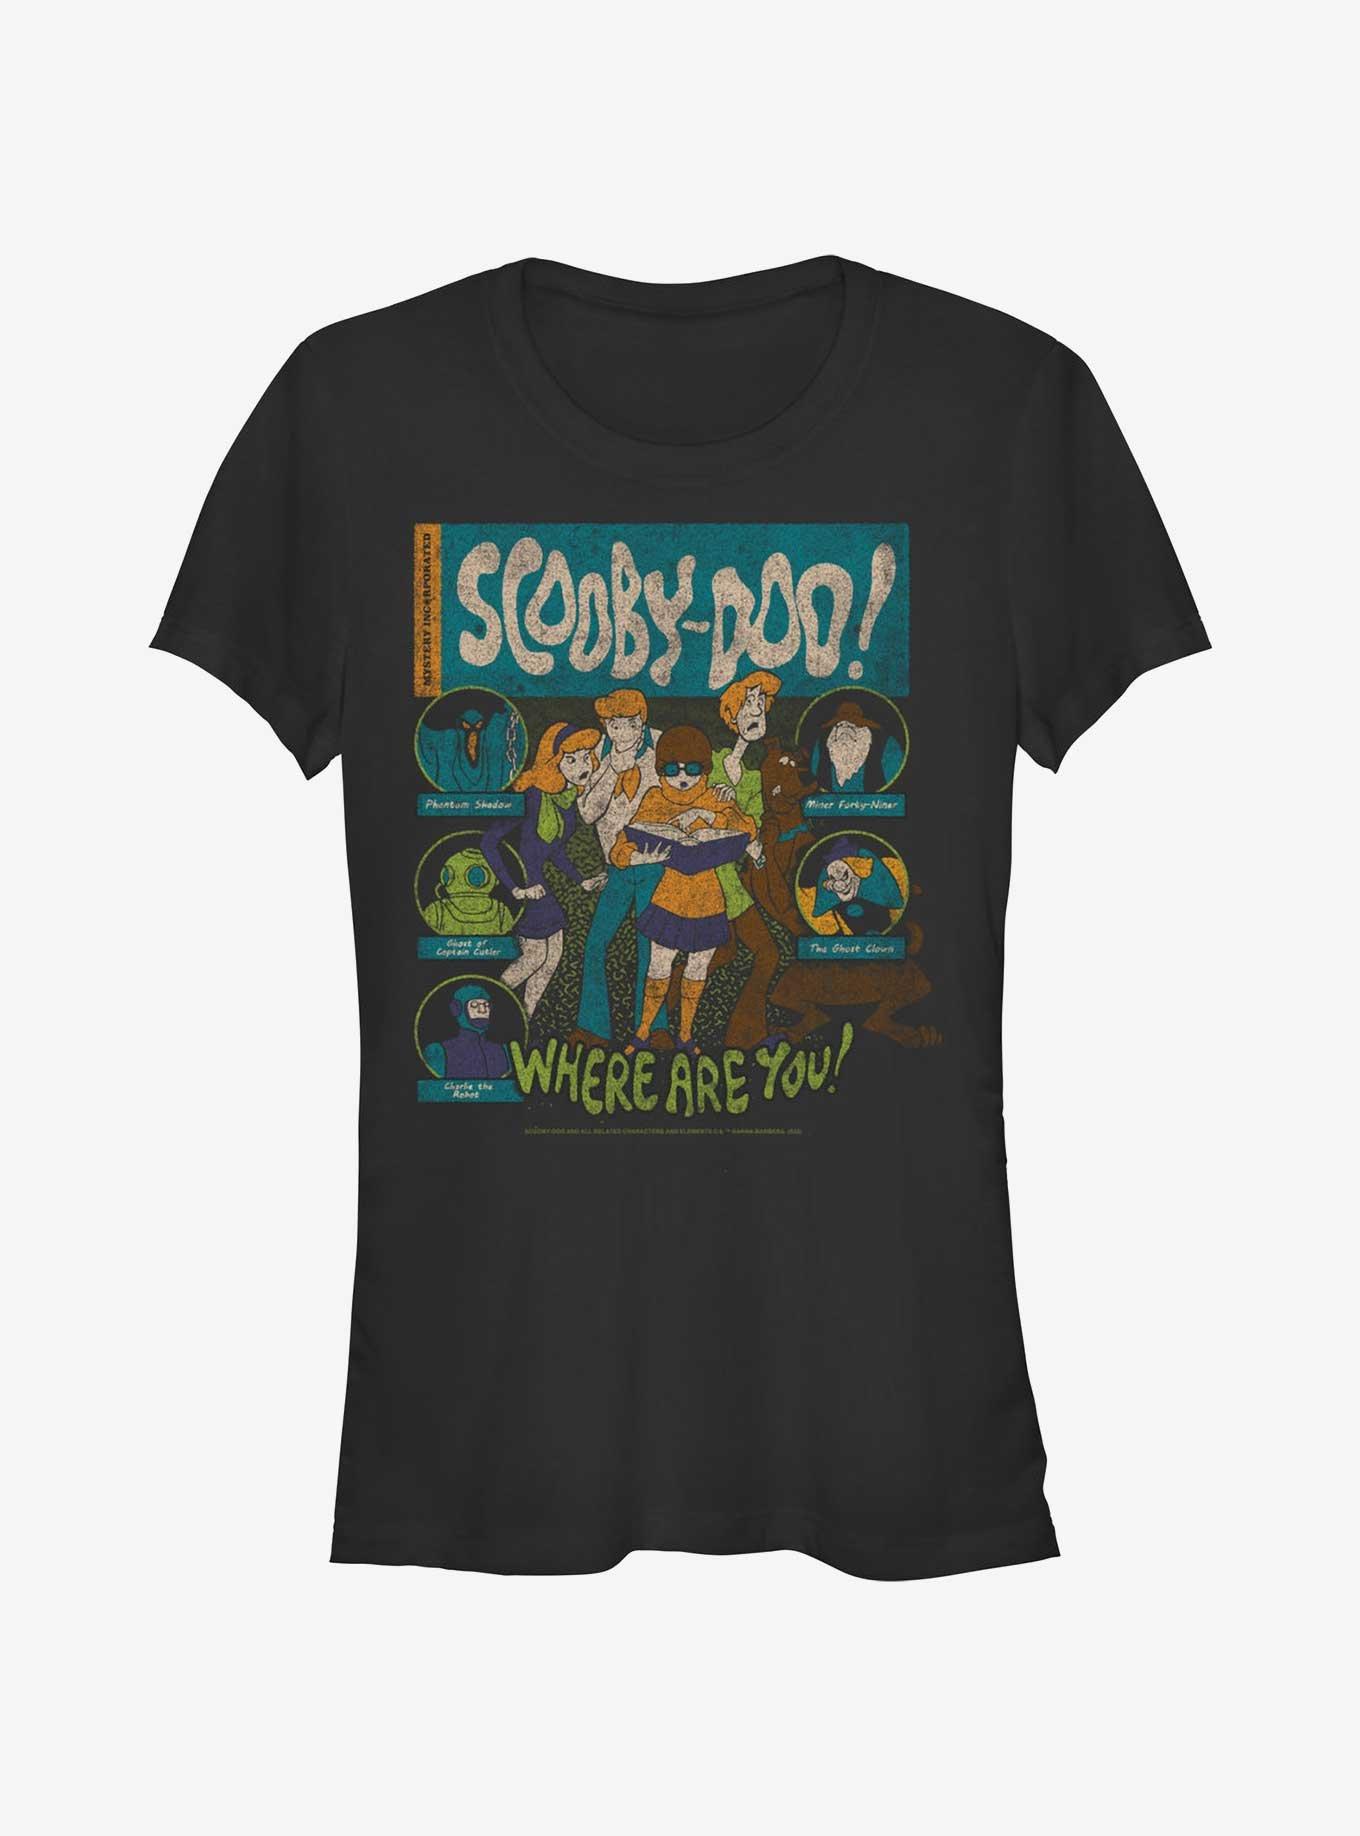 Scooby Doo Mystery Poster Girls T-Shirt, BLACK, hi-res